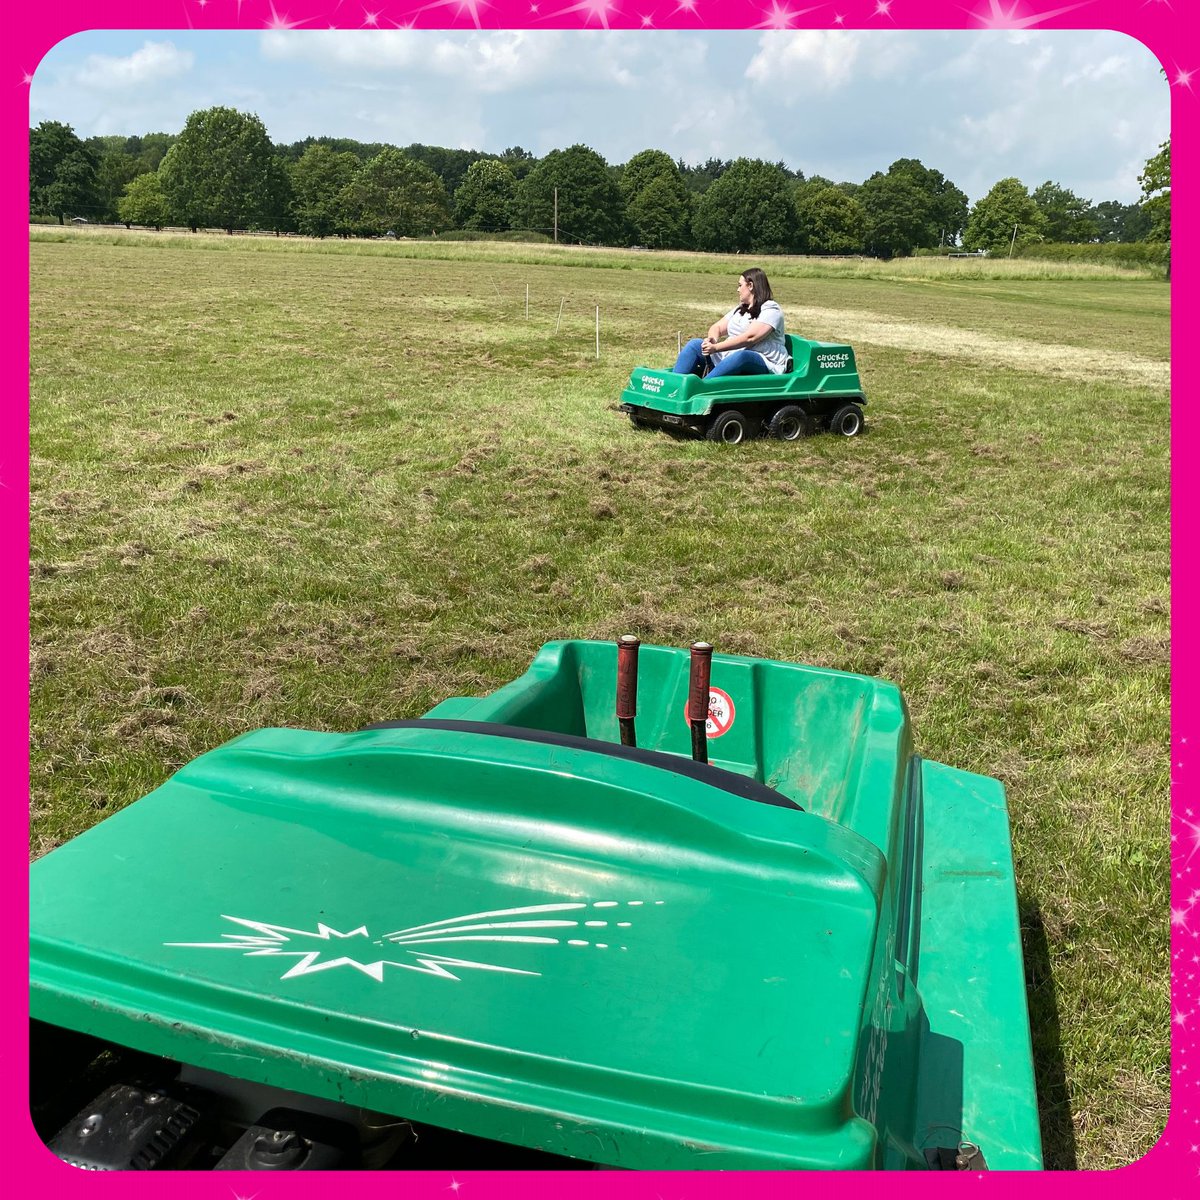 Boost team morale with our fun and lively Chuckle Buggies! 🚗😂

Watch as your team bonds and laughs together while completing challenges.

Book now for a successful team-building event!

#ChuckleBuggies #TeamBuilding #FunTimes #HappyTeam #Bonding #OfficeFun